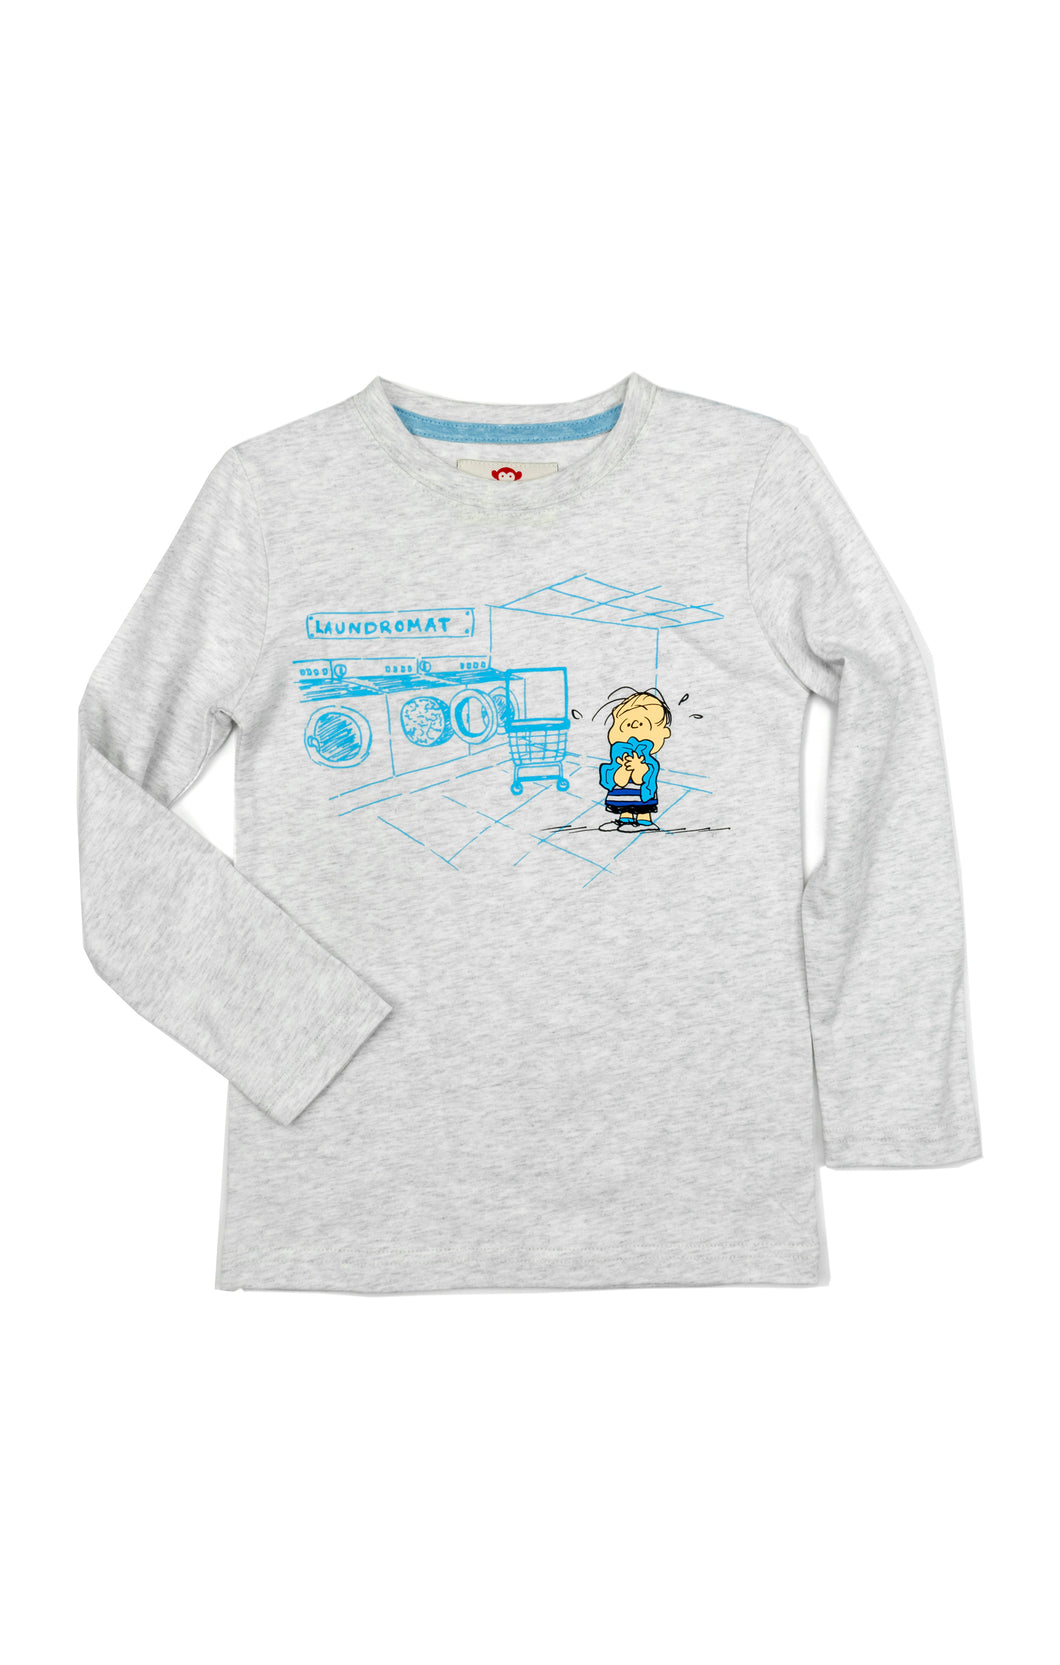 Peanuts Graphic Tee - Linus at the Laundromat